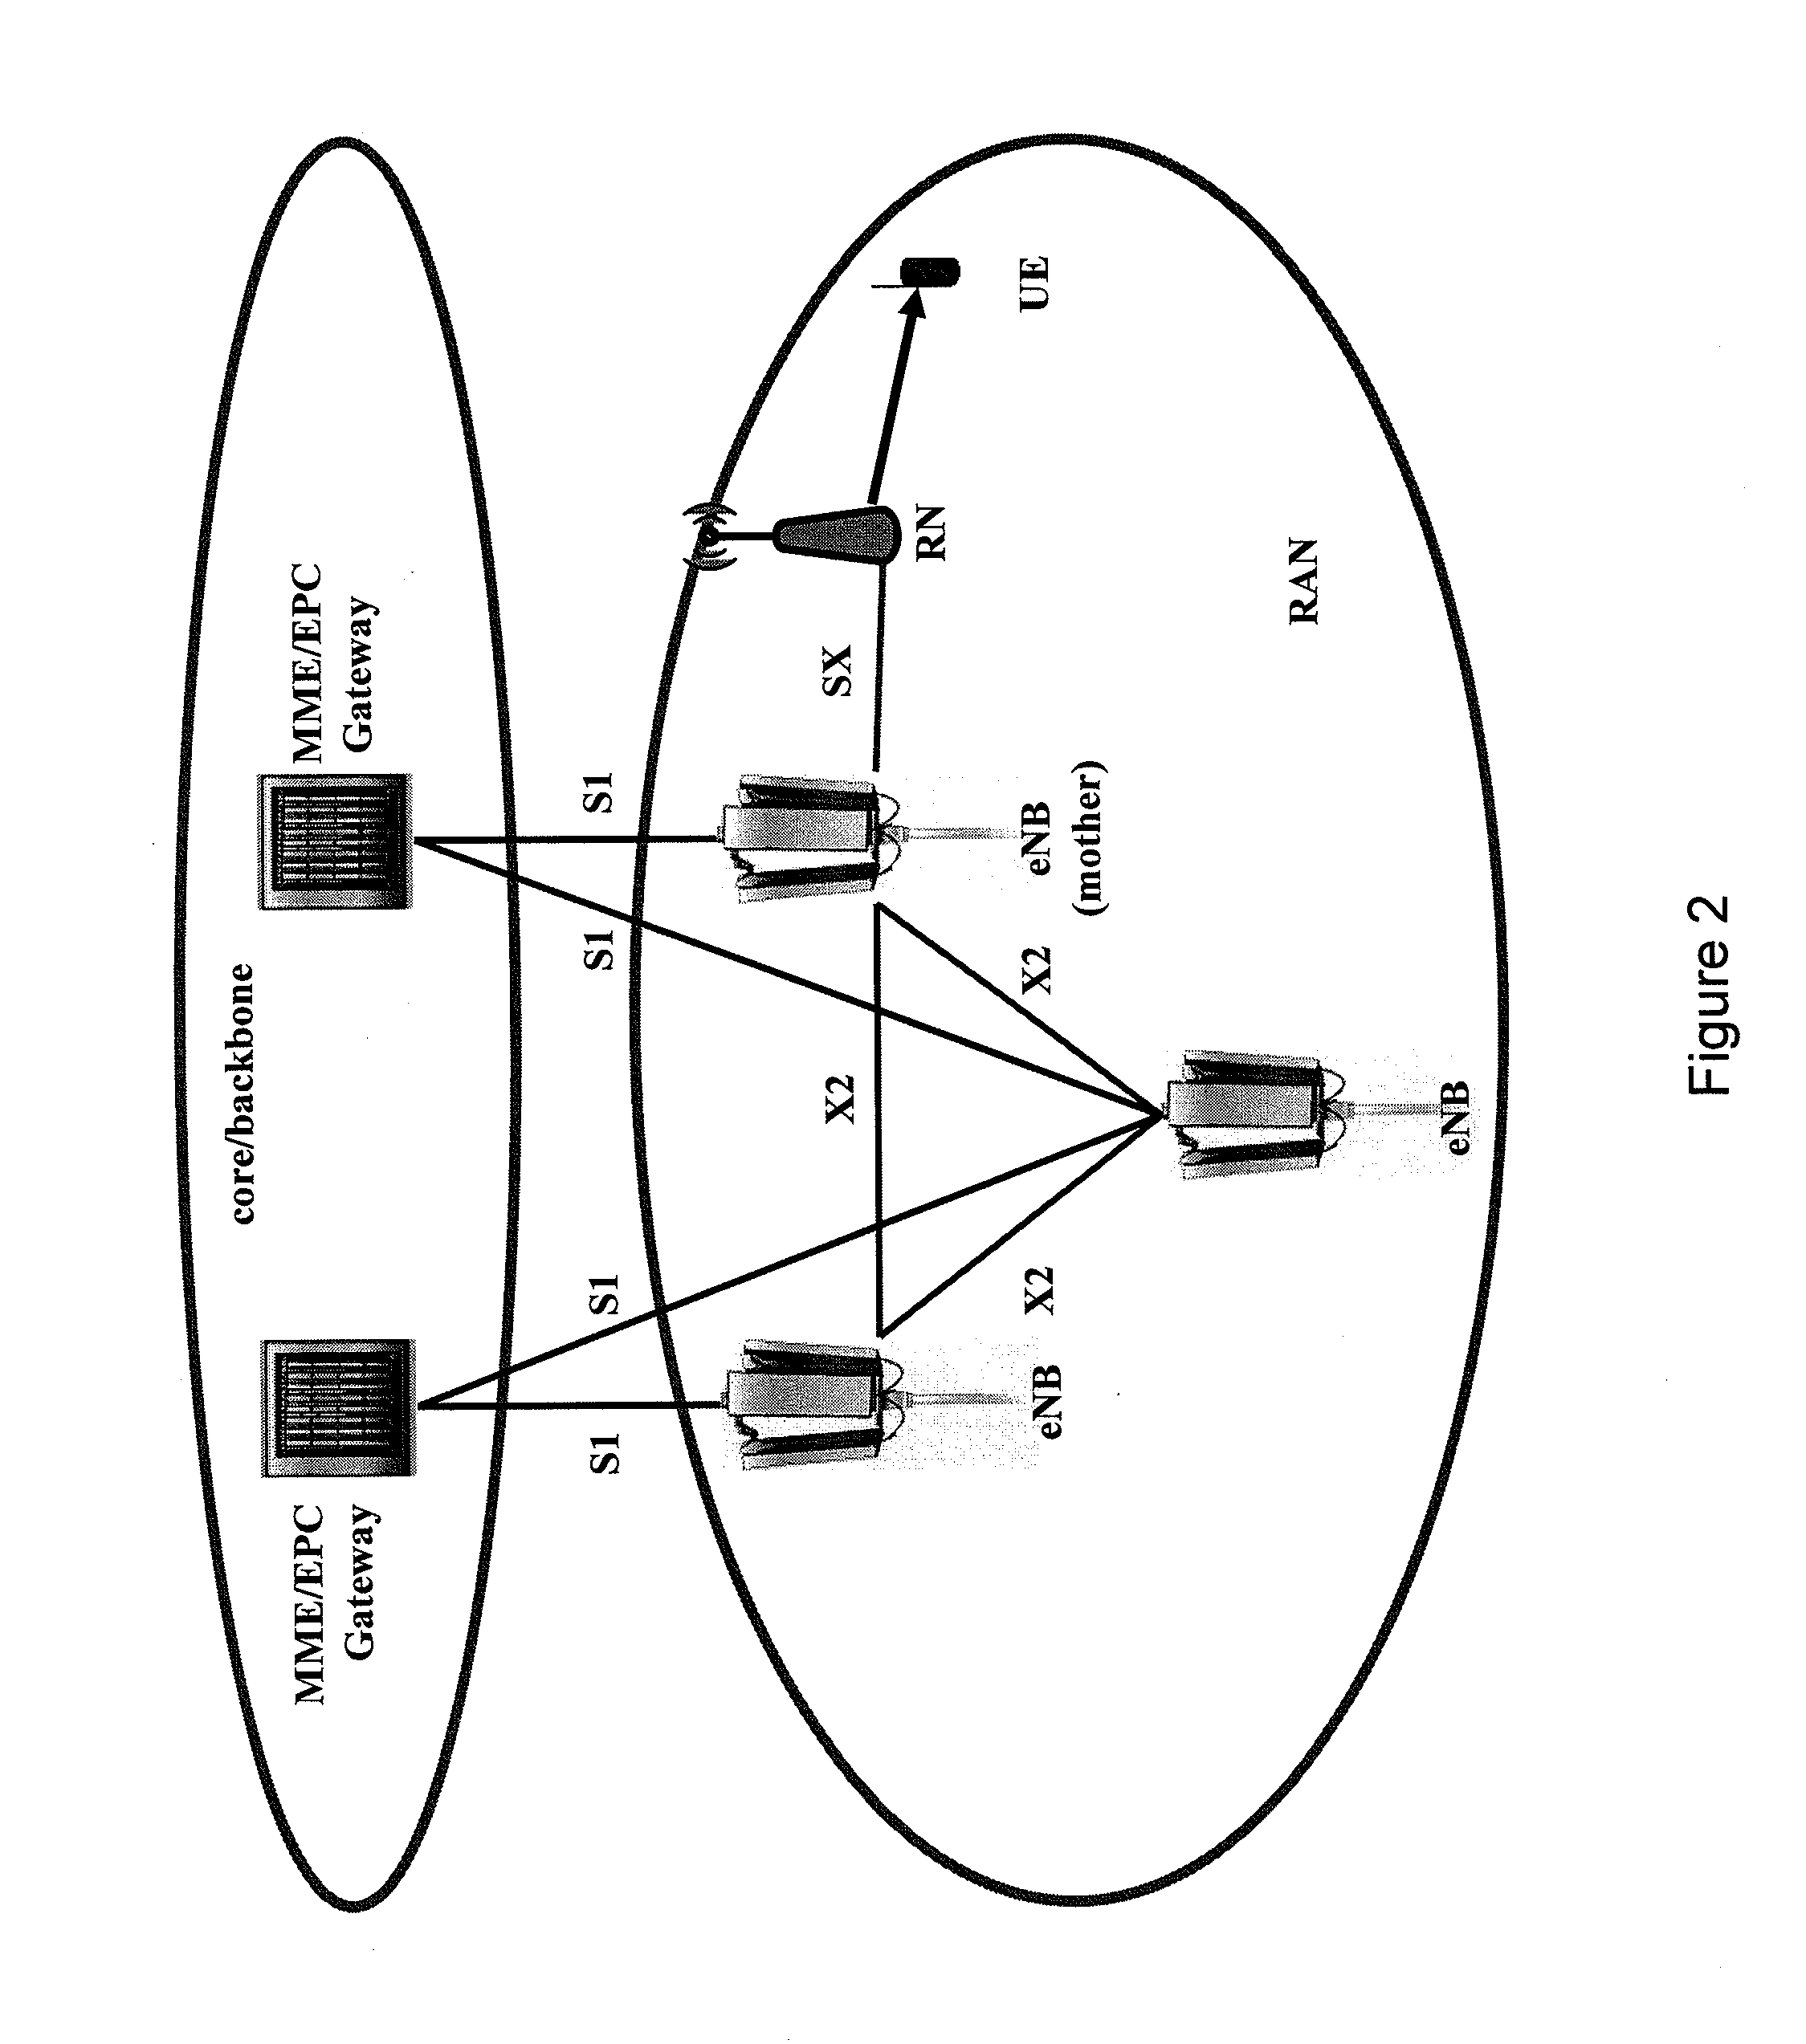 Load Balancing in Relay-Enhanced Access Networks